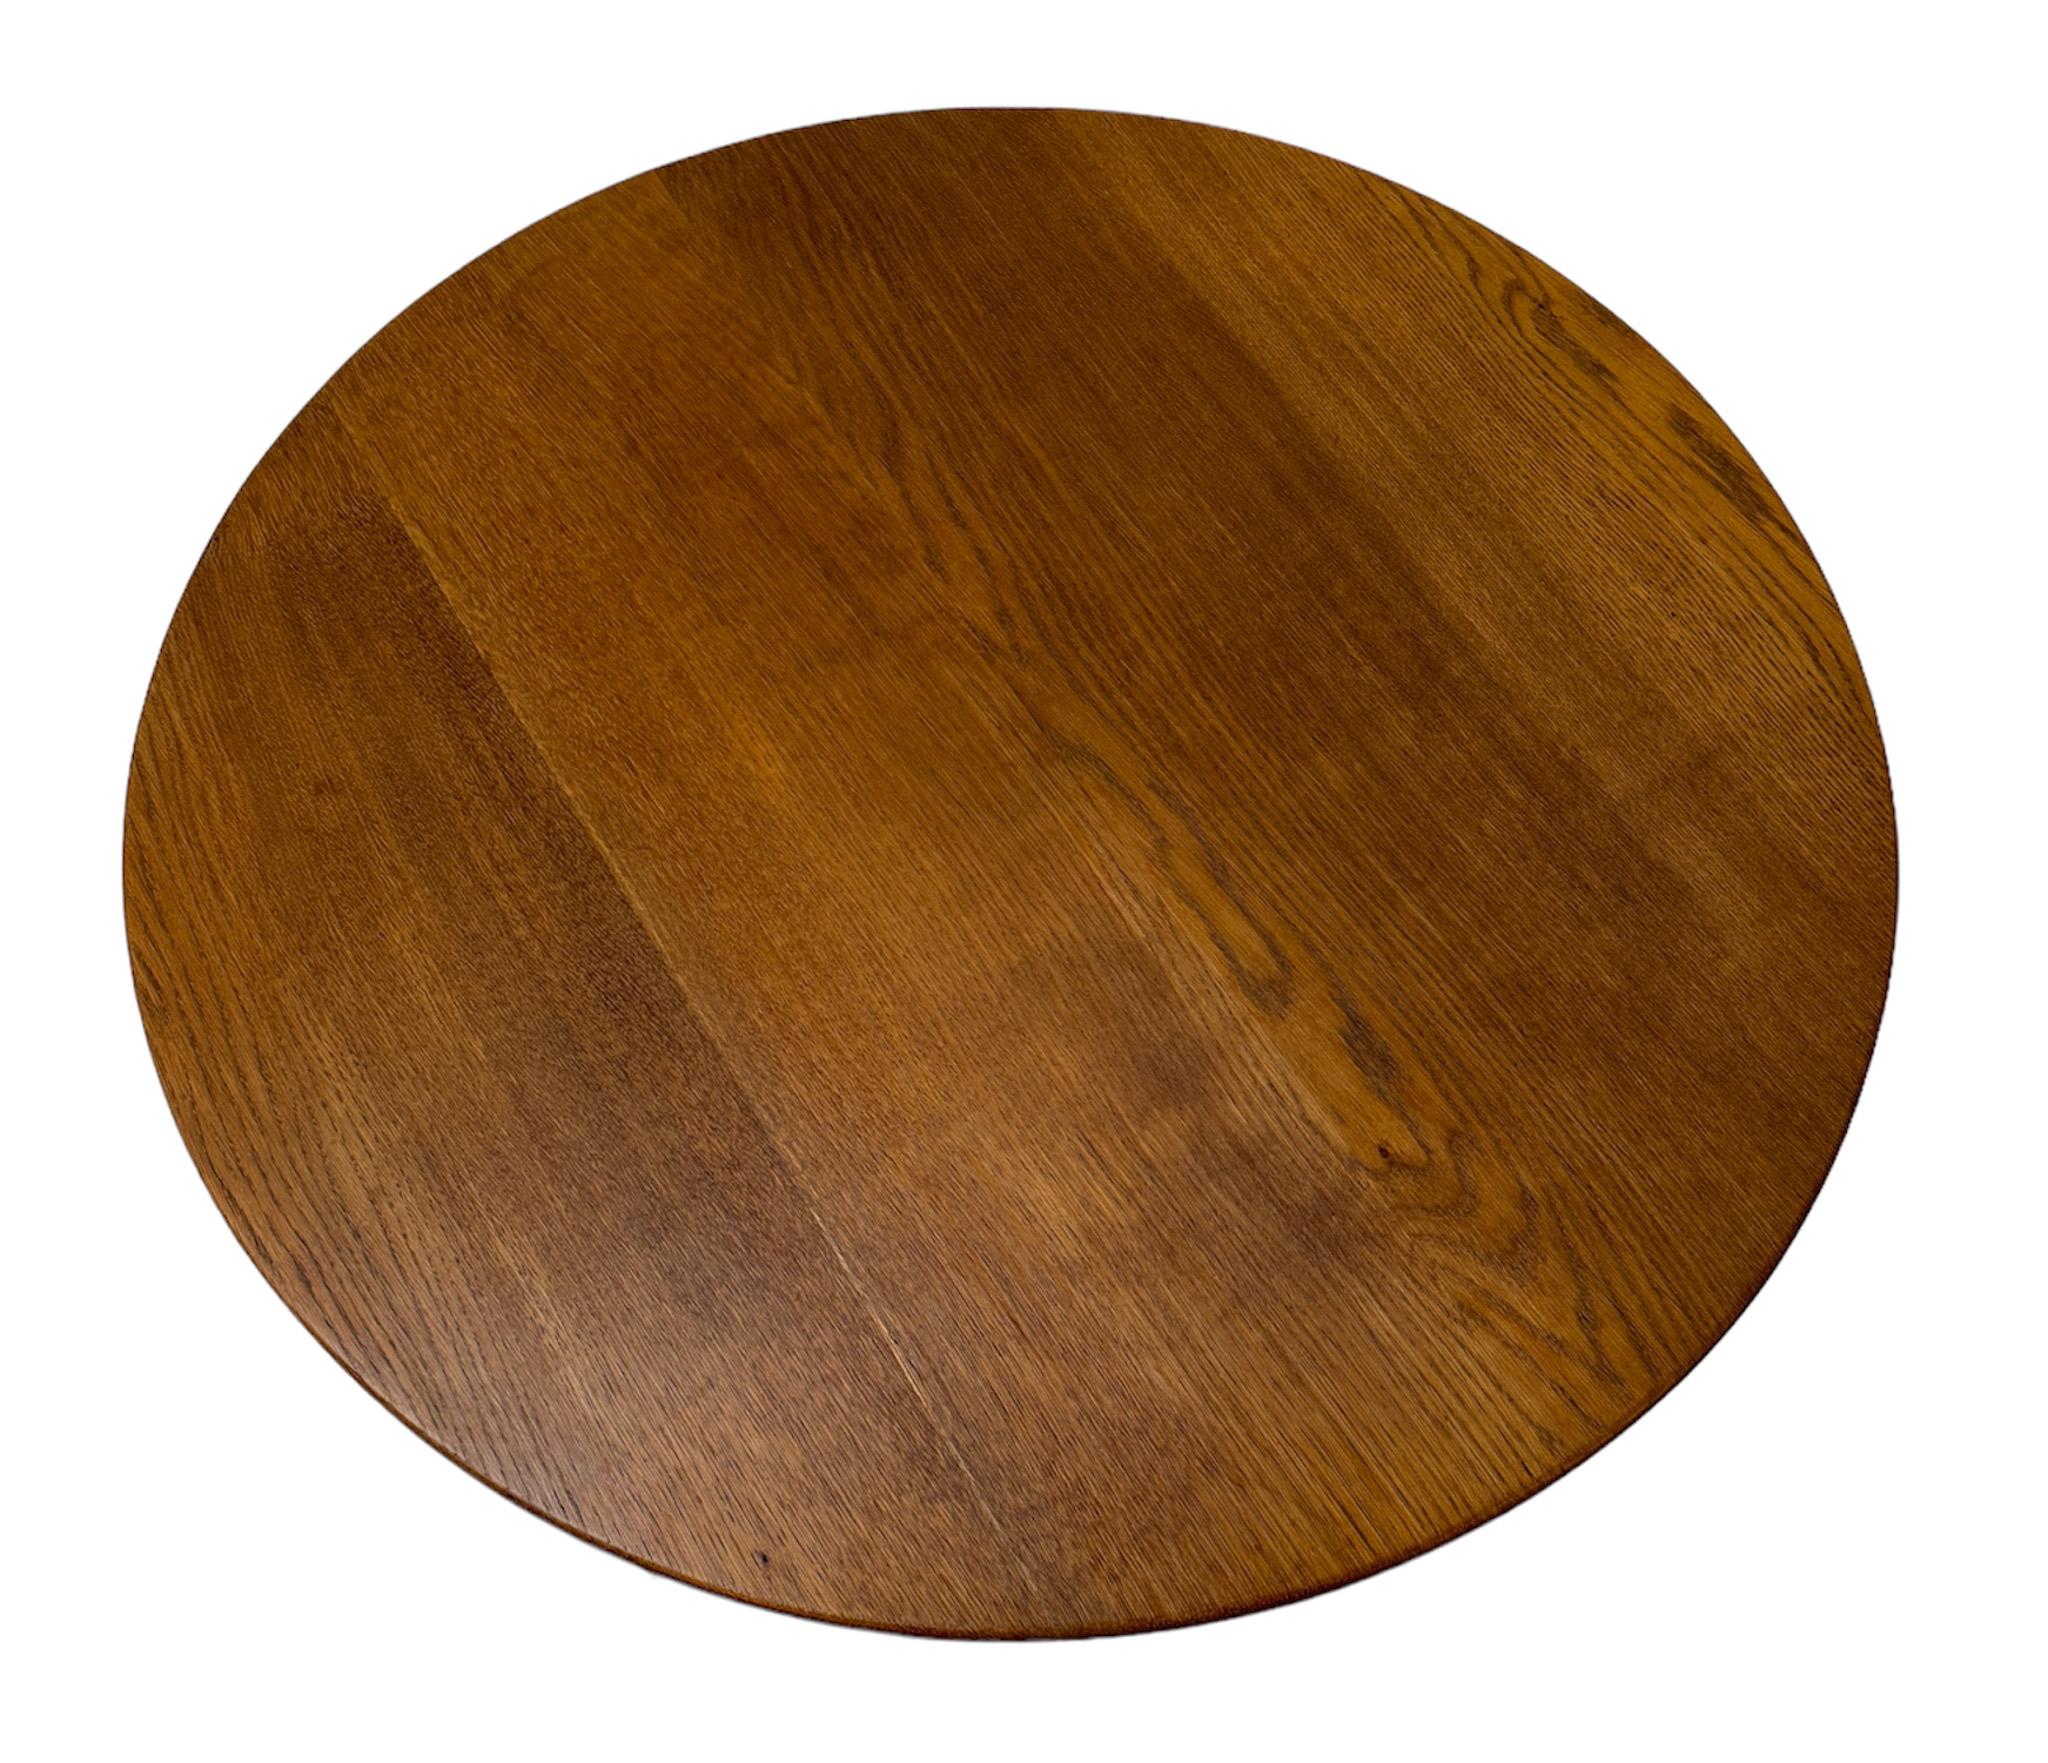 Oak Art Deco Amsterdamse School Center Table by Paul Bromberg for Metz & Co. For Sale 1